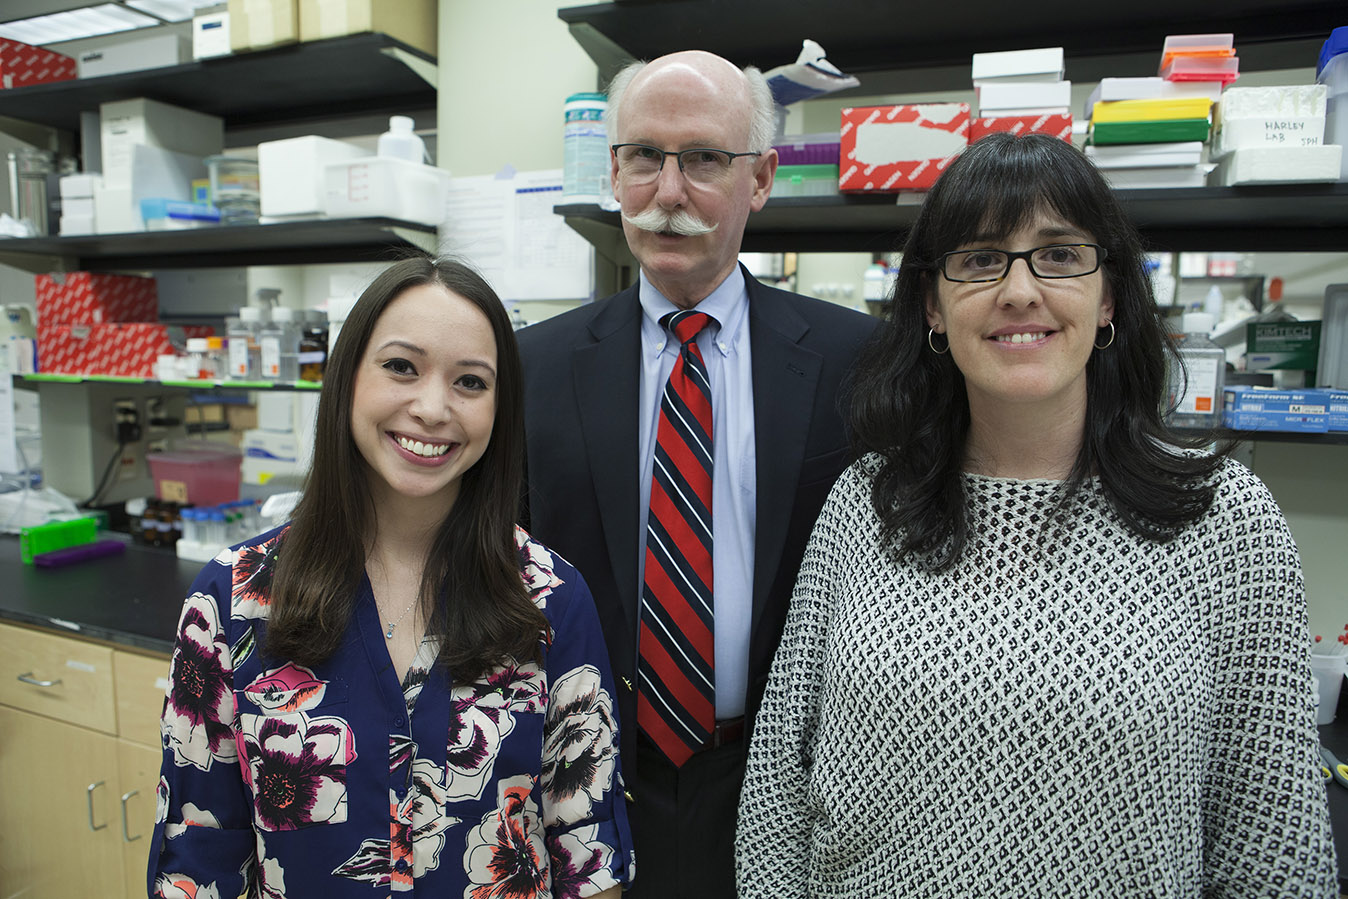 Illinios alumnus and former manager of Ecolab Scott Fisher (center) with PhD student Samantha Zambuto (left) and Research Assistant Professor Sara Pedron Haba (right)